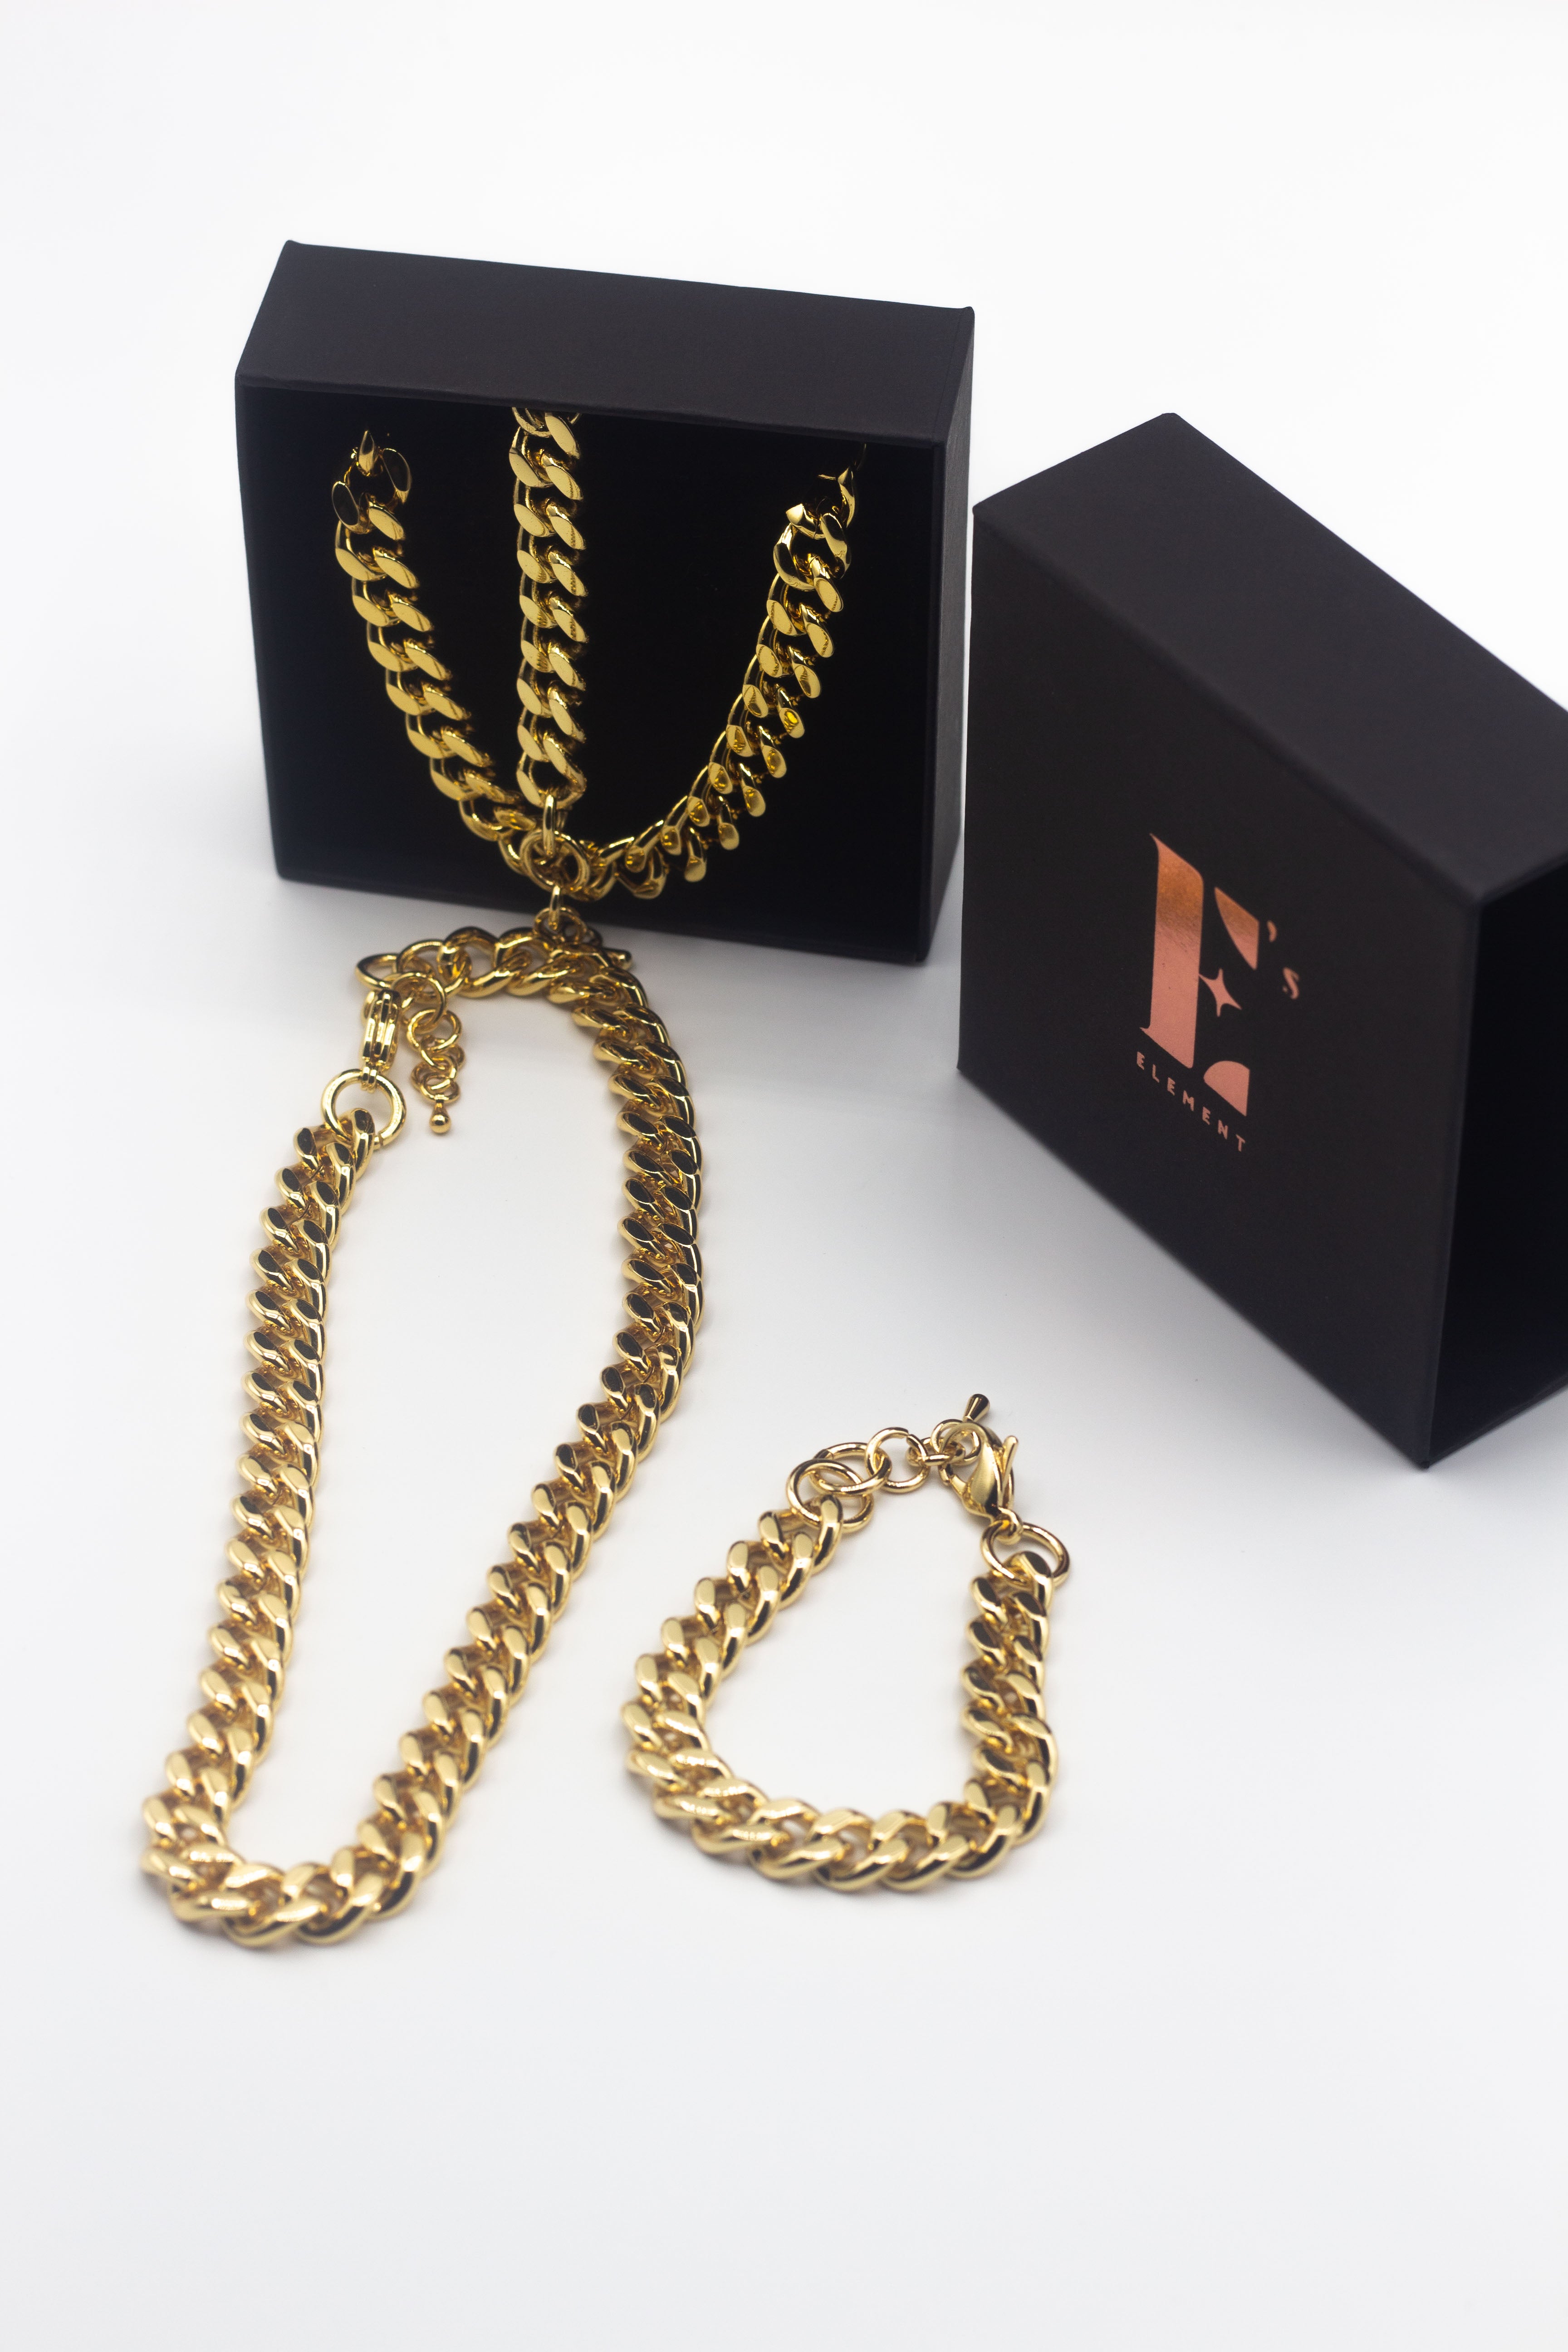 18k gold chain and necklace. On the left, the chain necklace and bracelet are placed in a black opened container. In front of the container is a gold chain necklace. On the right is the cap for the container with the E's Element logo imprinted in gold. Under the cap is a gold chain bracelet. The Emmanuela Set in Gold by E's Element.